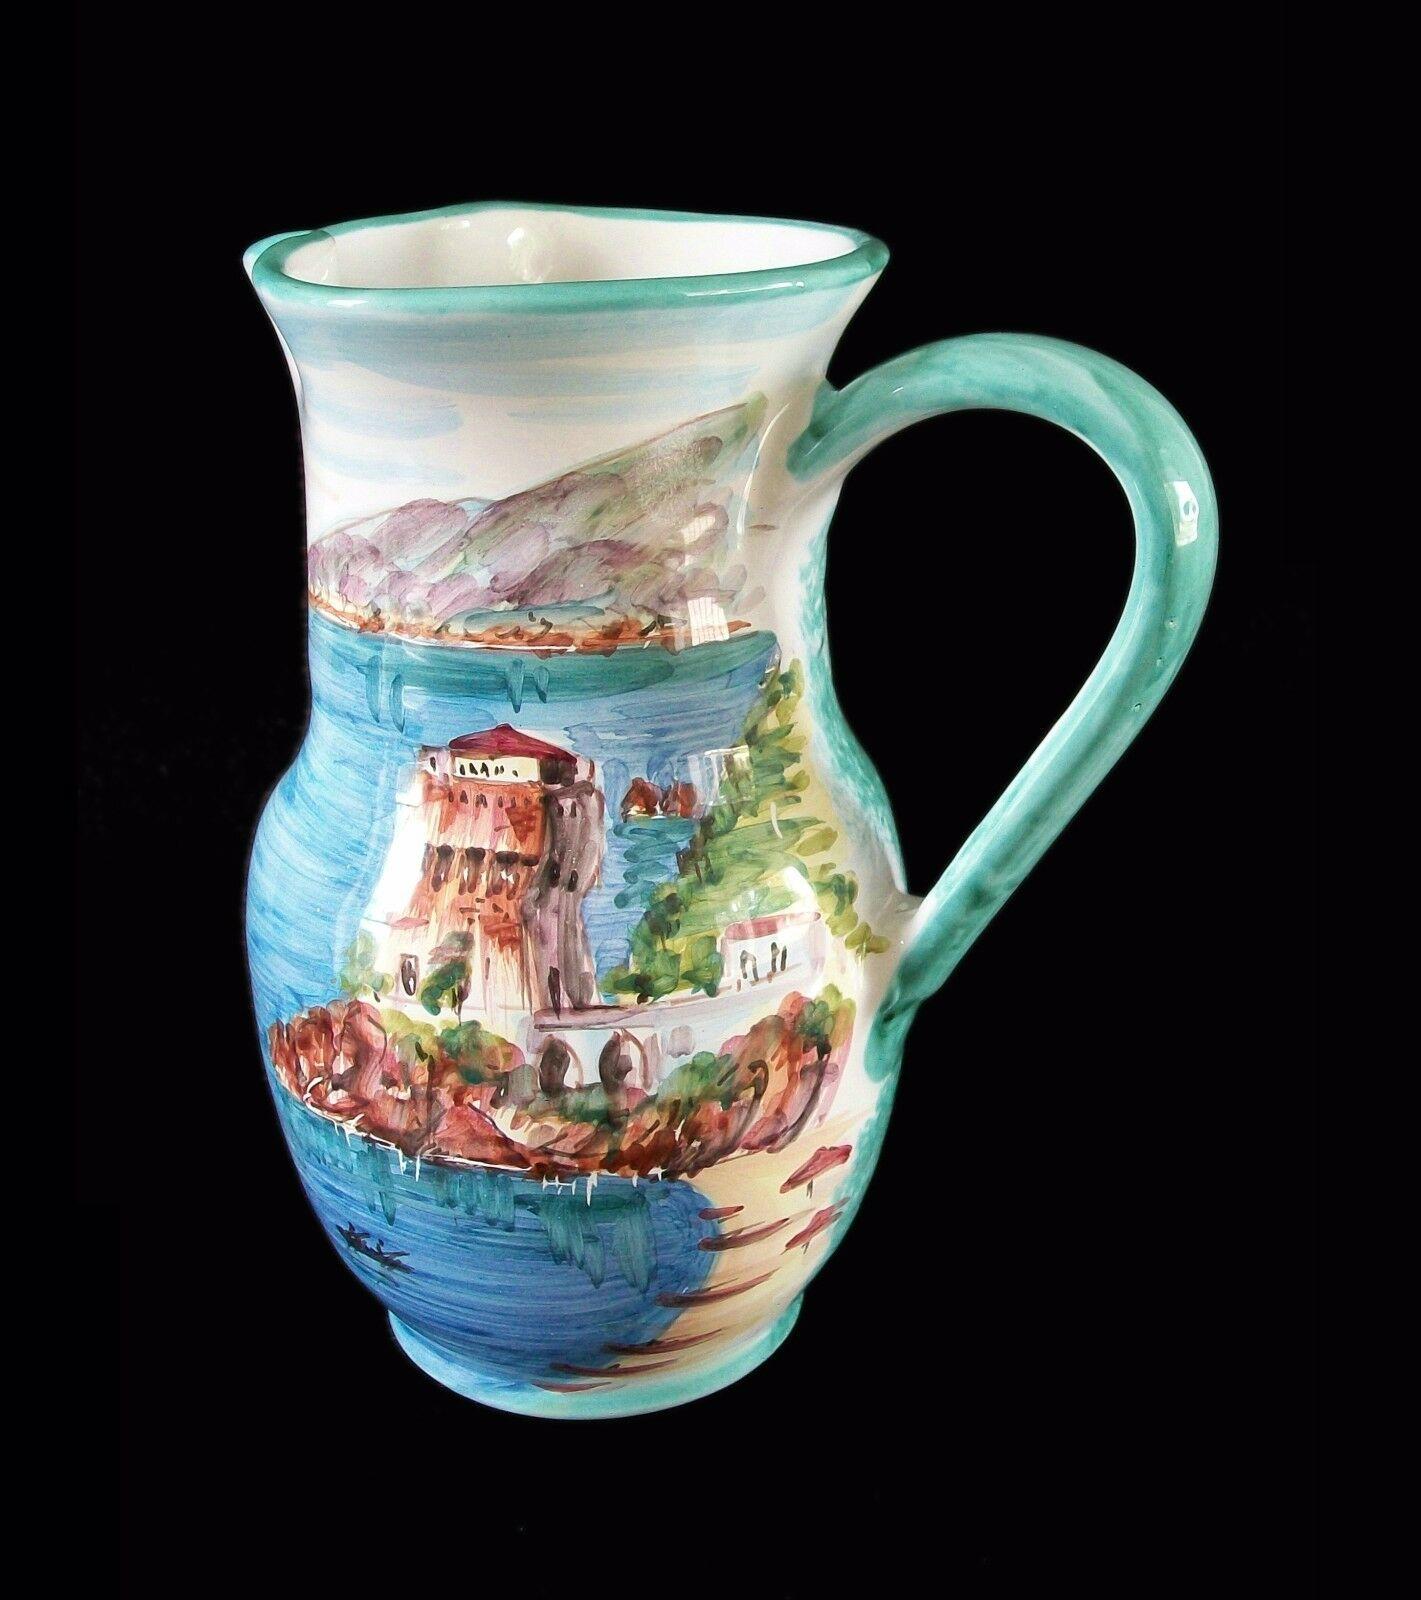 VIETRI - Vintage hand painted and wheel thrown terracotta pitcher - featuring a scenic view of the Amalfi coast - sponge decorated back with white glazed interior - signed on the back and base - Italy - late 20th century.

Excellent/mint vintage